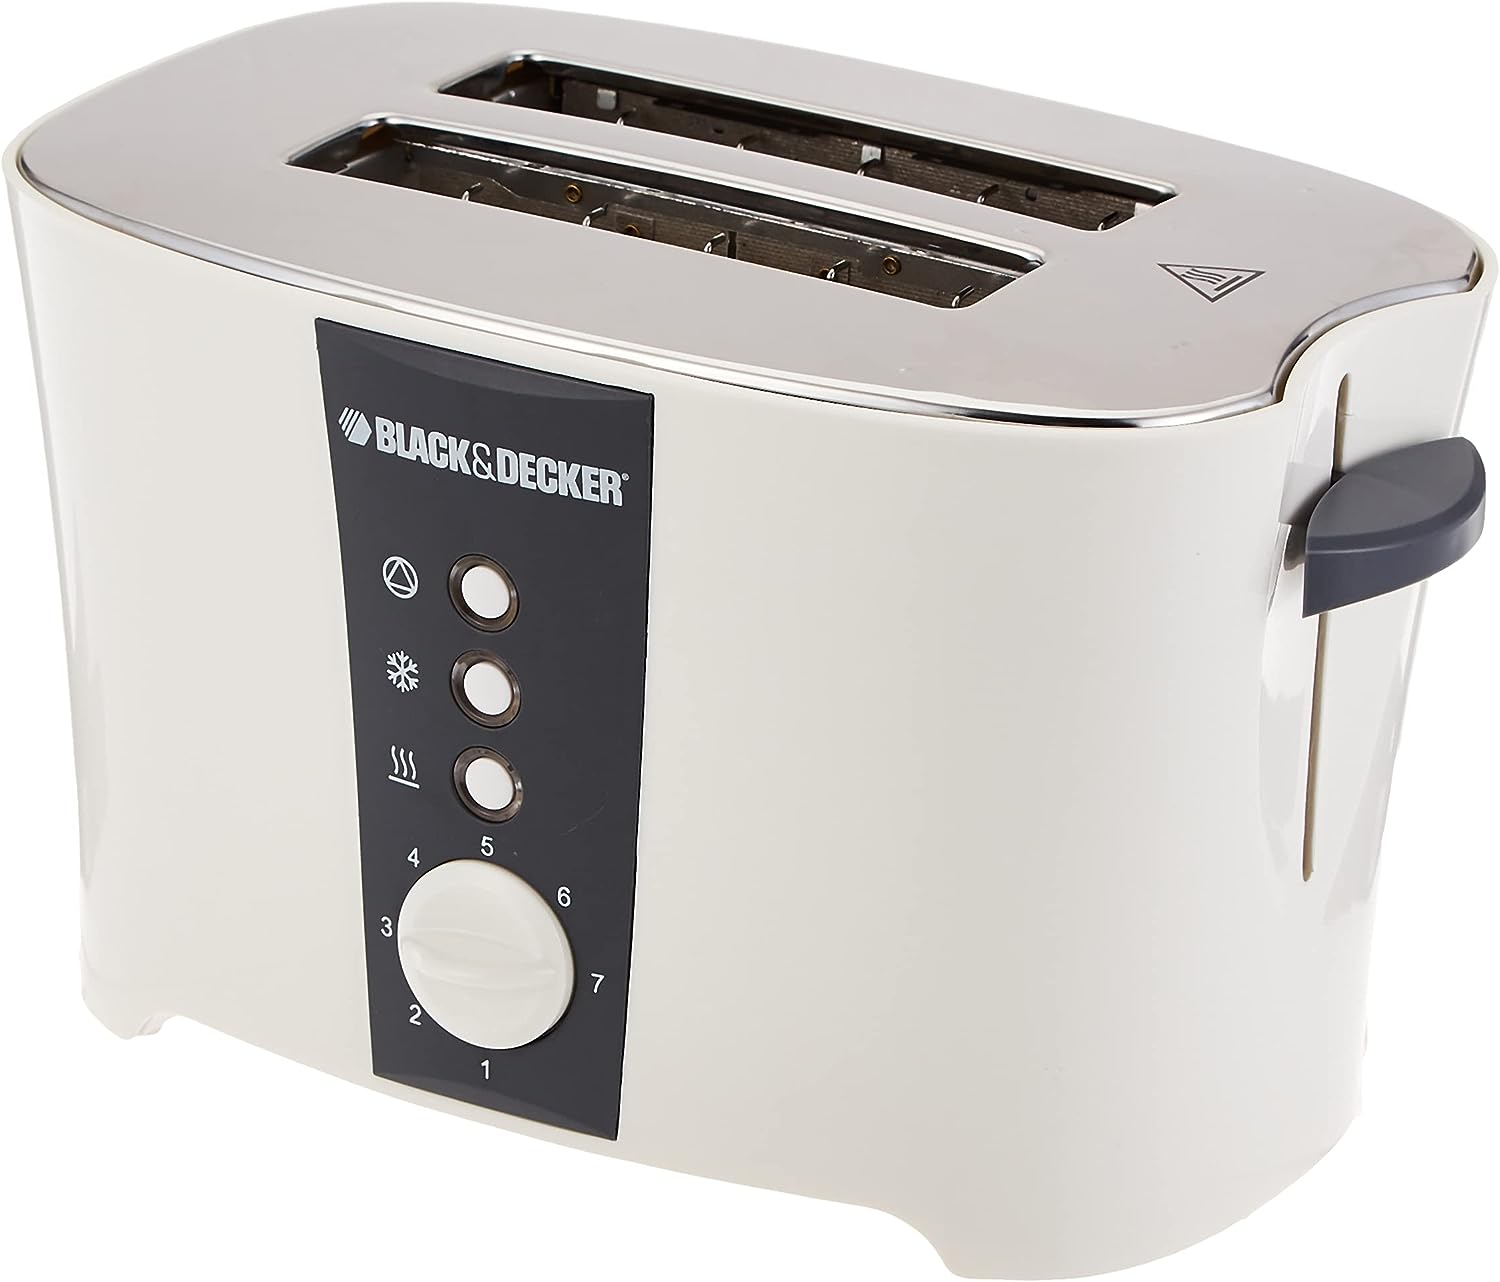 BLACK+DECKER 800W Toaster 2 Slice Browning Control with Frozen Reheat, Cancel Functions And Cool Touch White, For Perfect Toasts Everyday ET122-B5, 1 year warranty